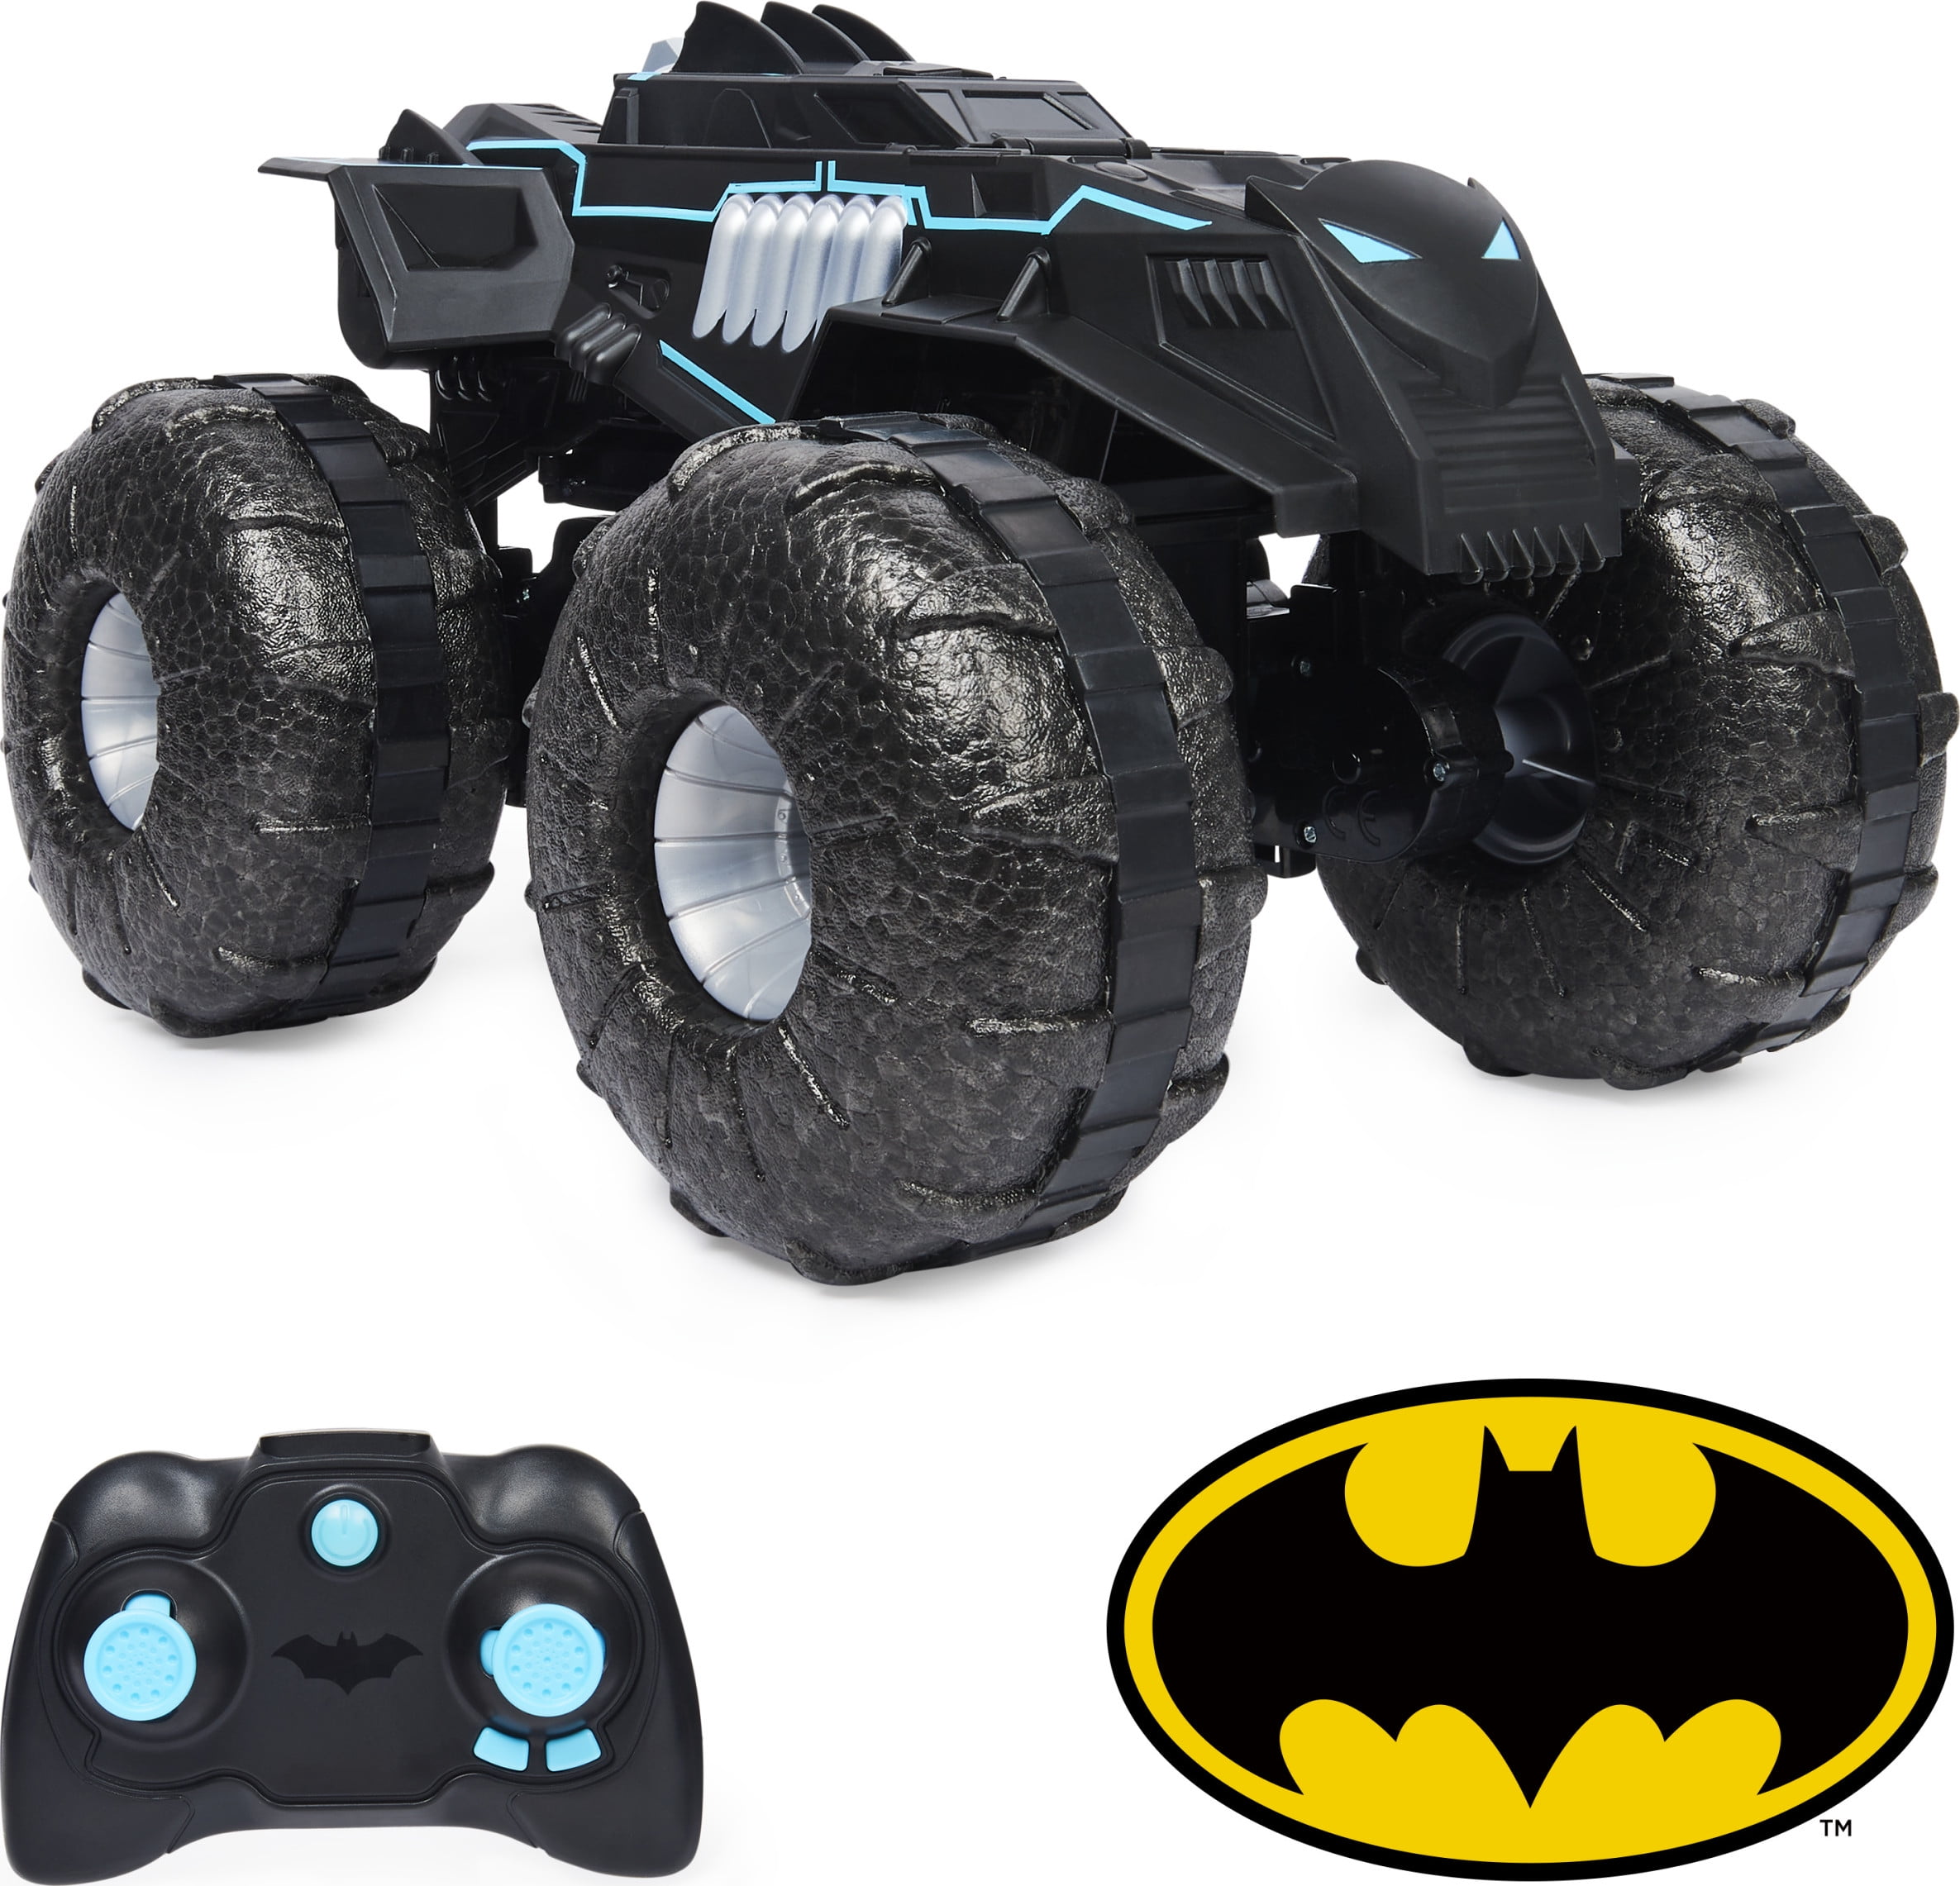 Batman super speed remote control car full direction kids toy gift